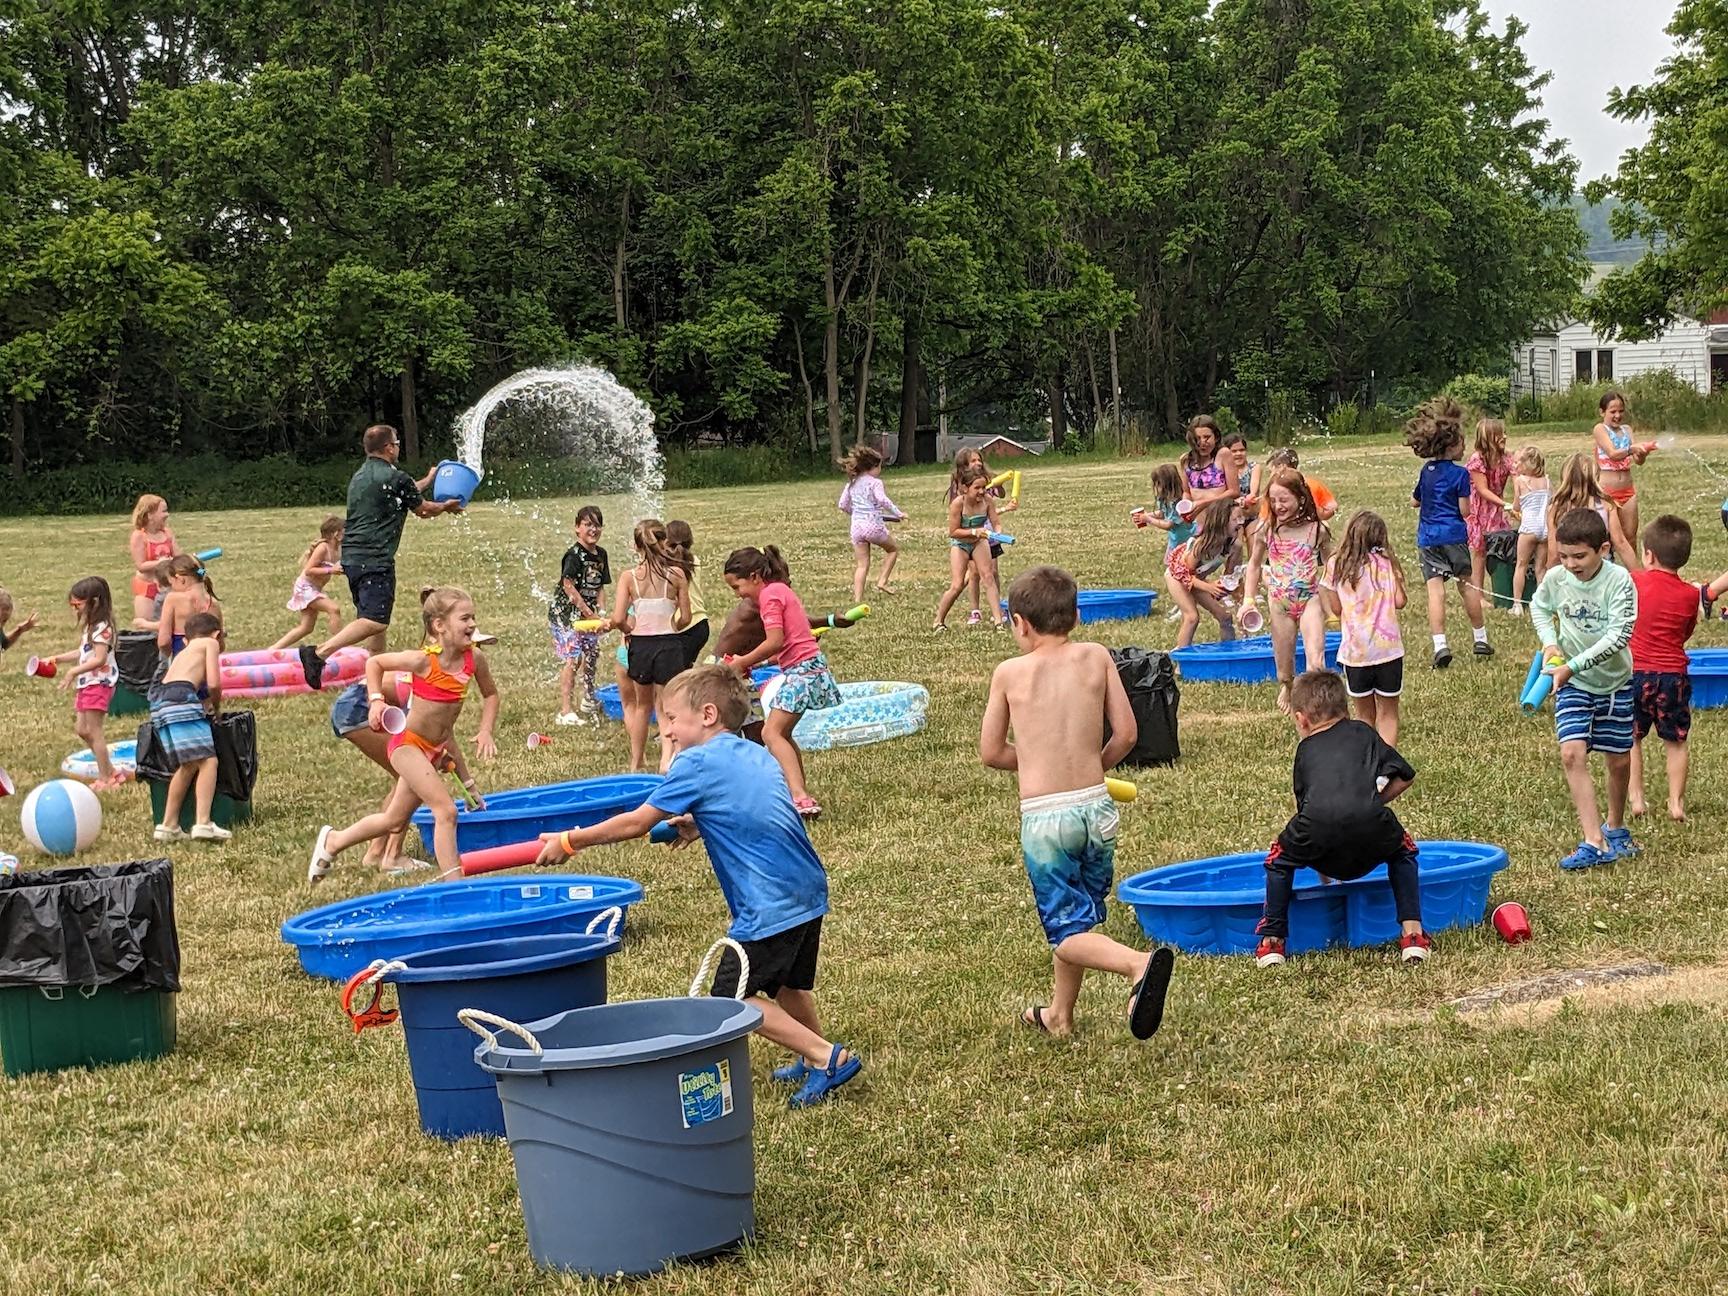 Students of all ages joined the water battle blast